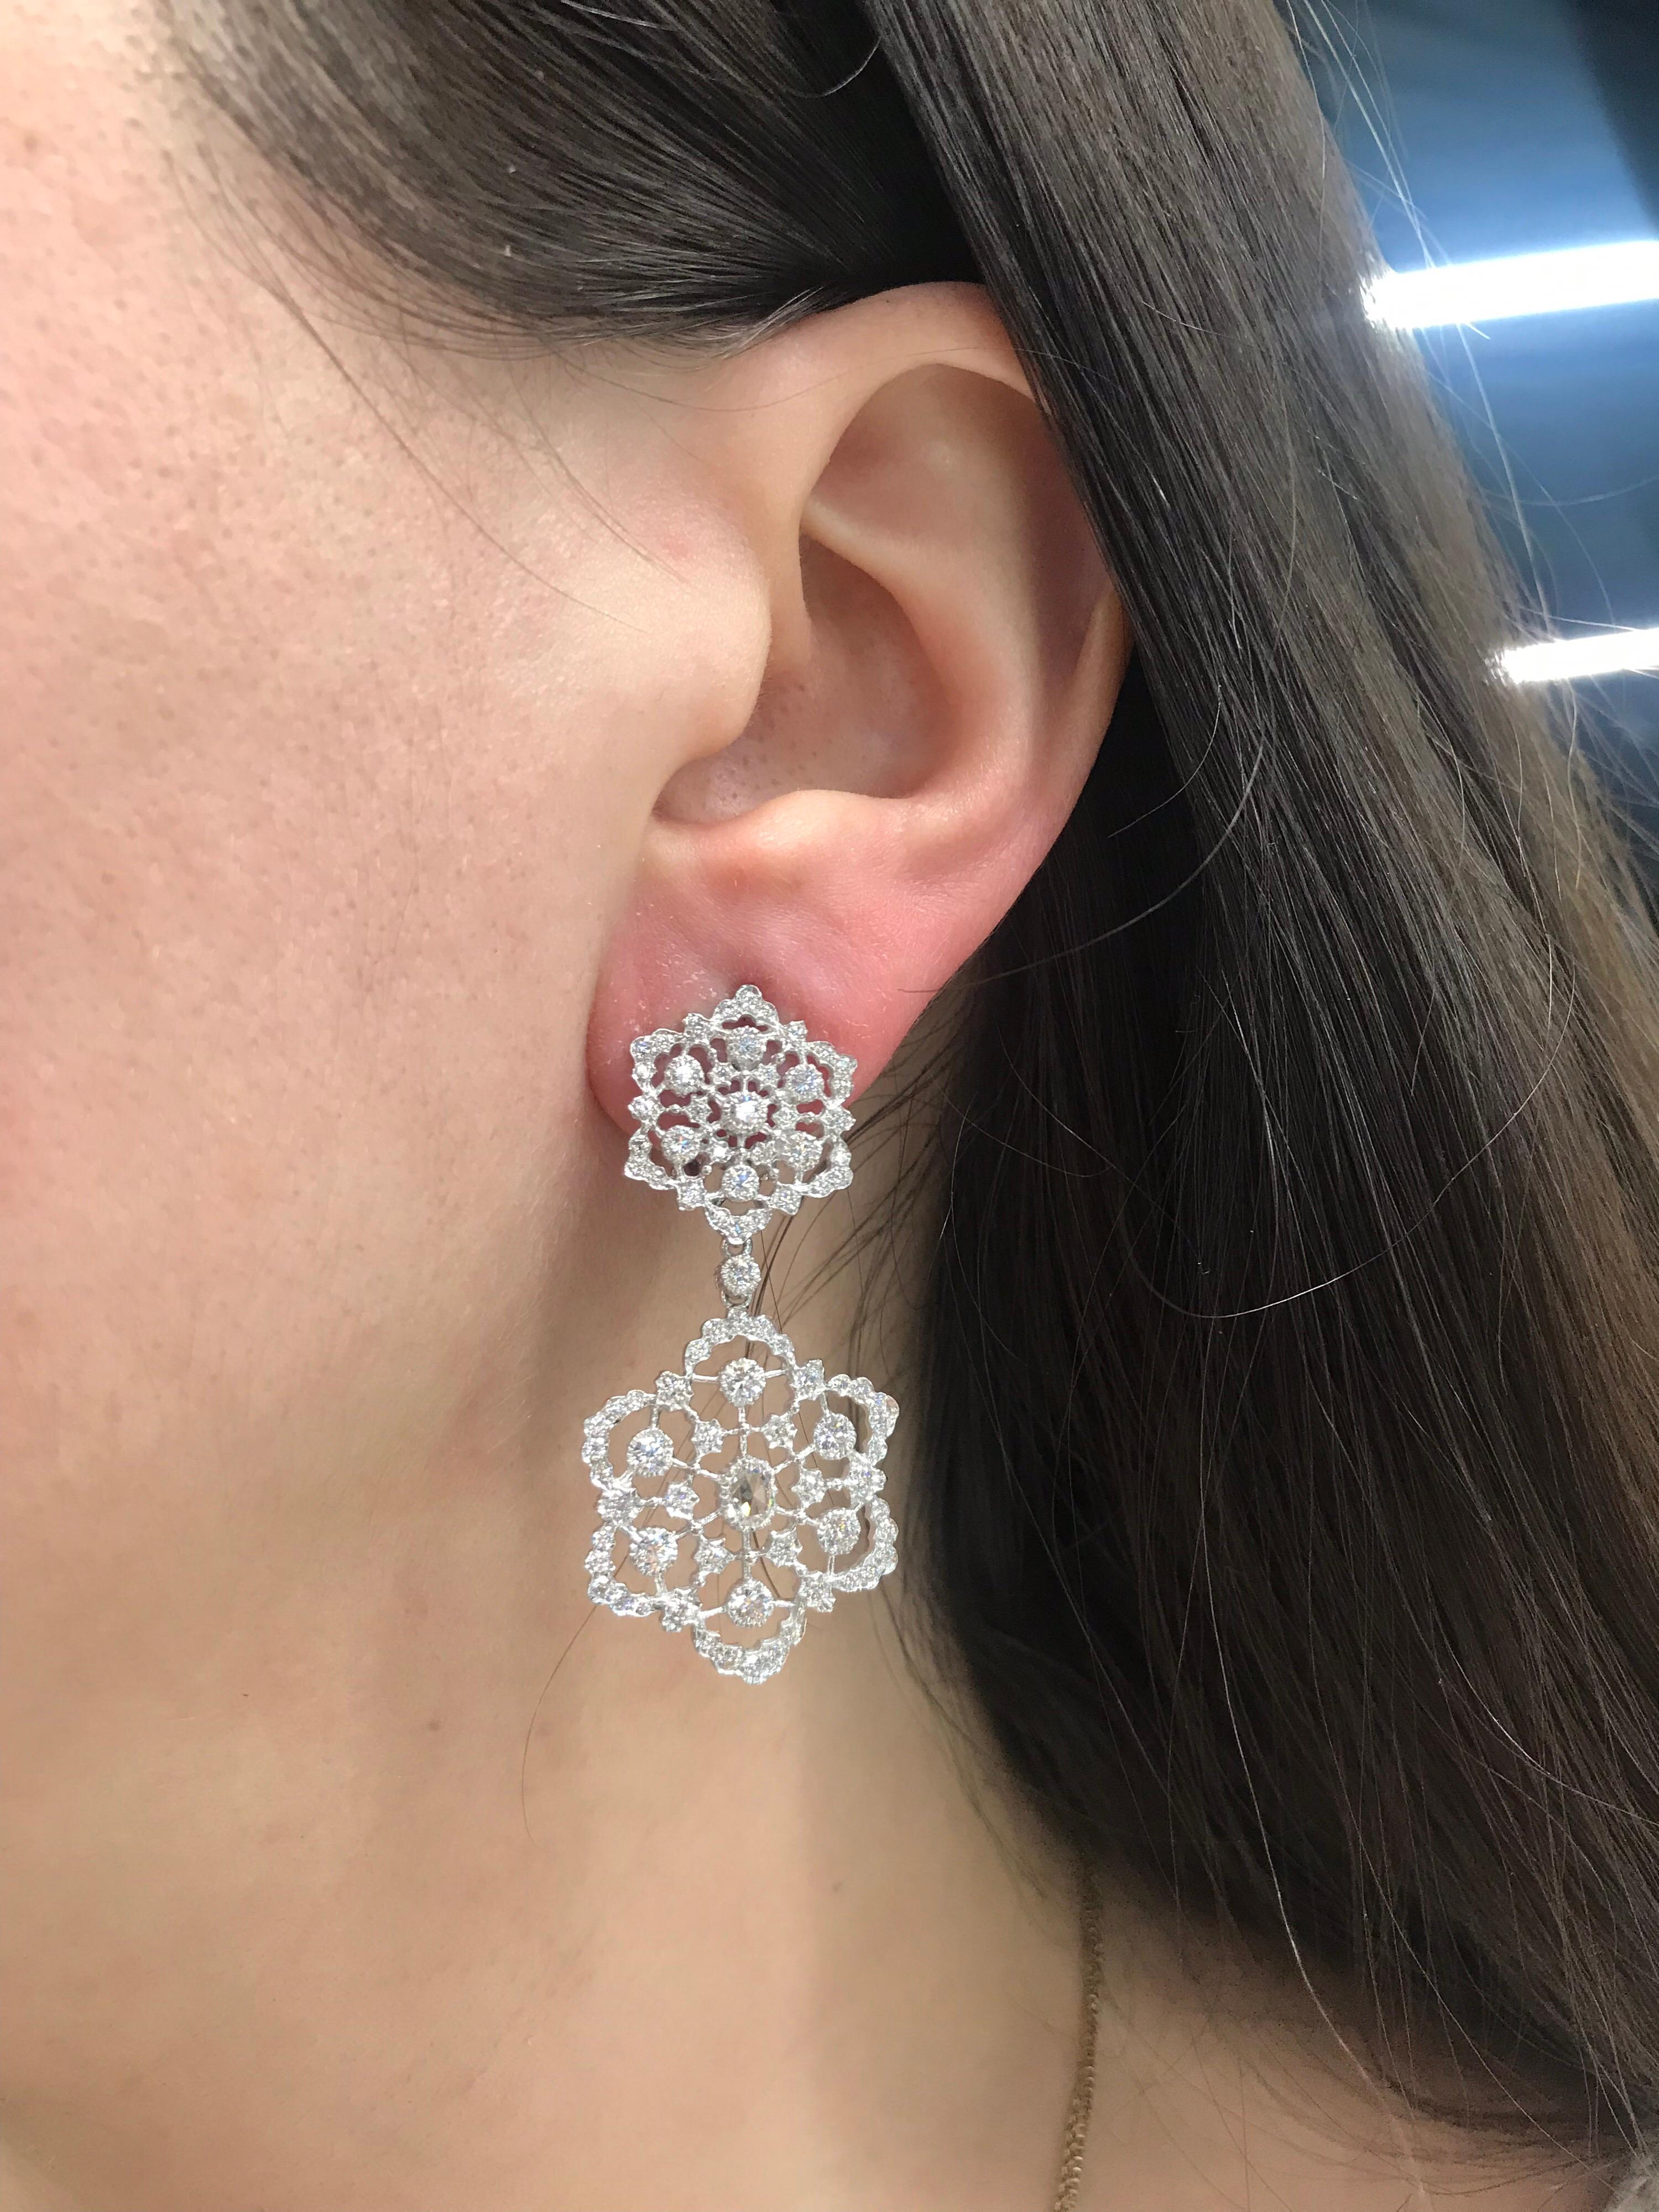 18K White gold drop earrings featuring a diamond floral motif with 174 round brilliants weighing 2.54 carats.